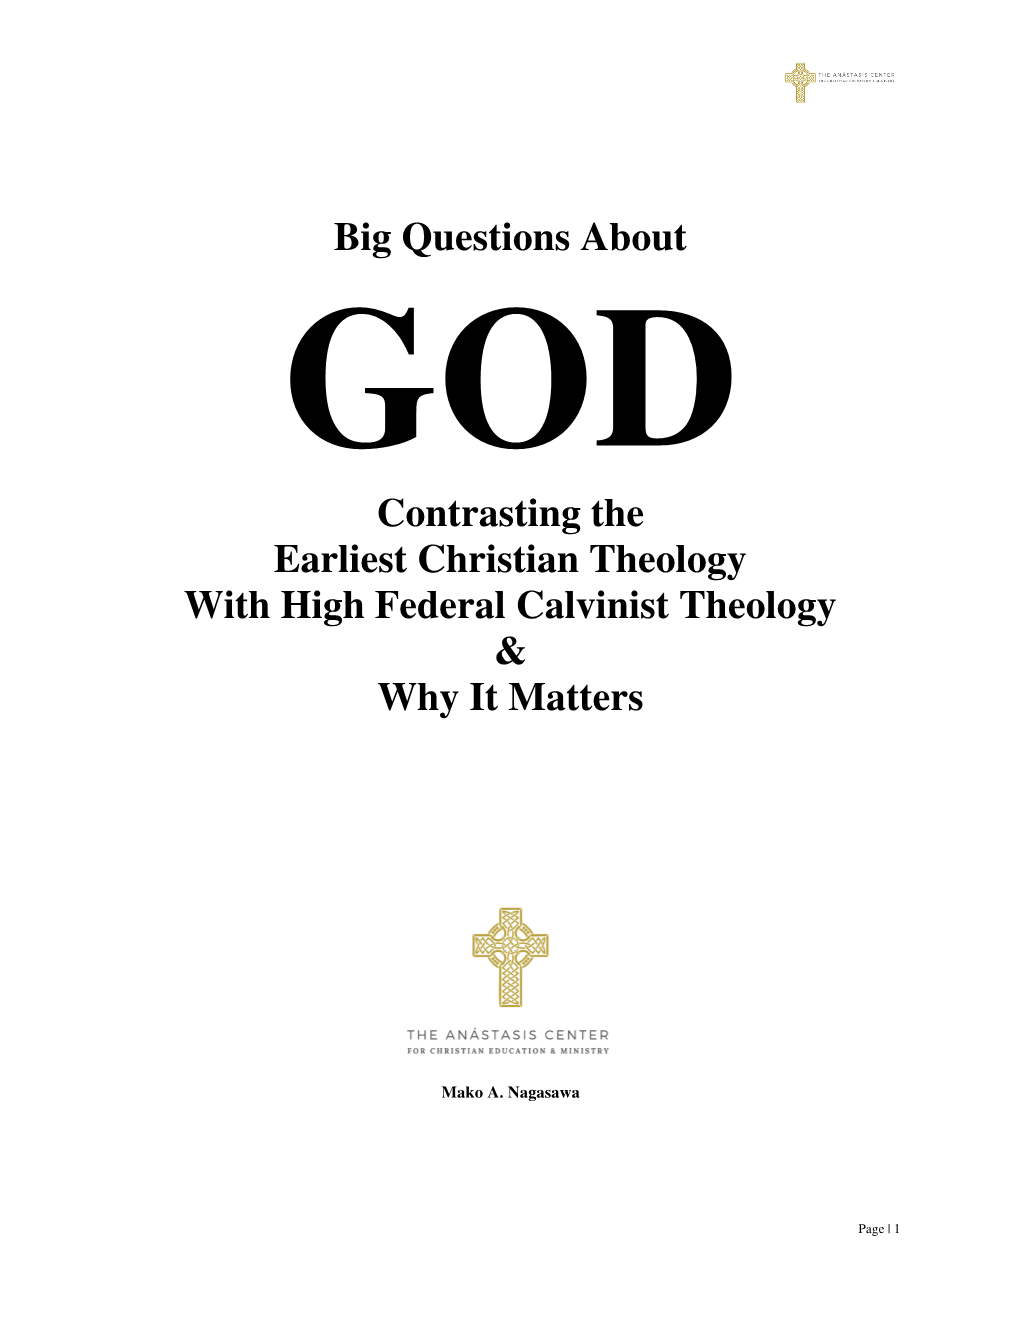 Big Questions About God: Contrasting Early and Reformed Theologies